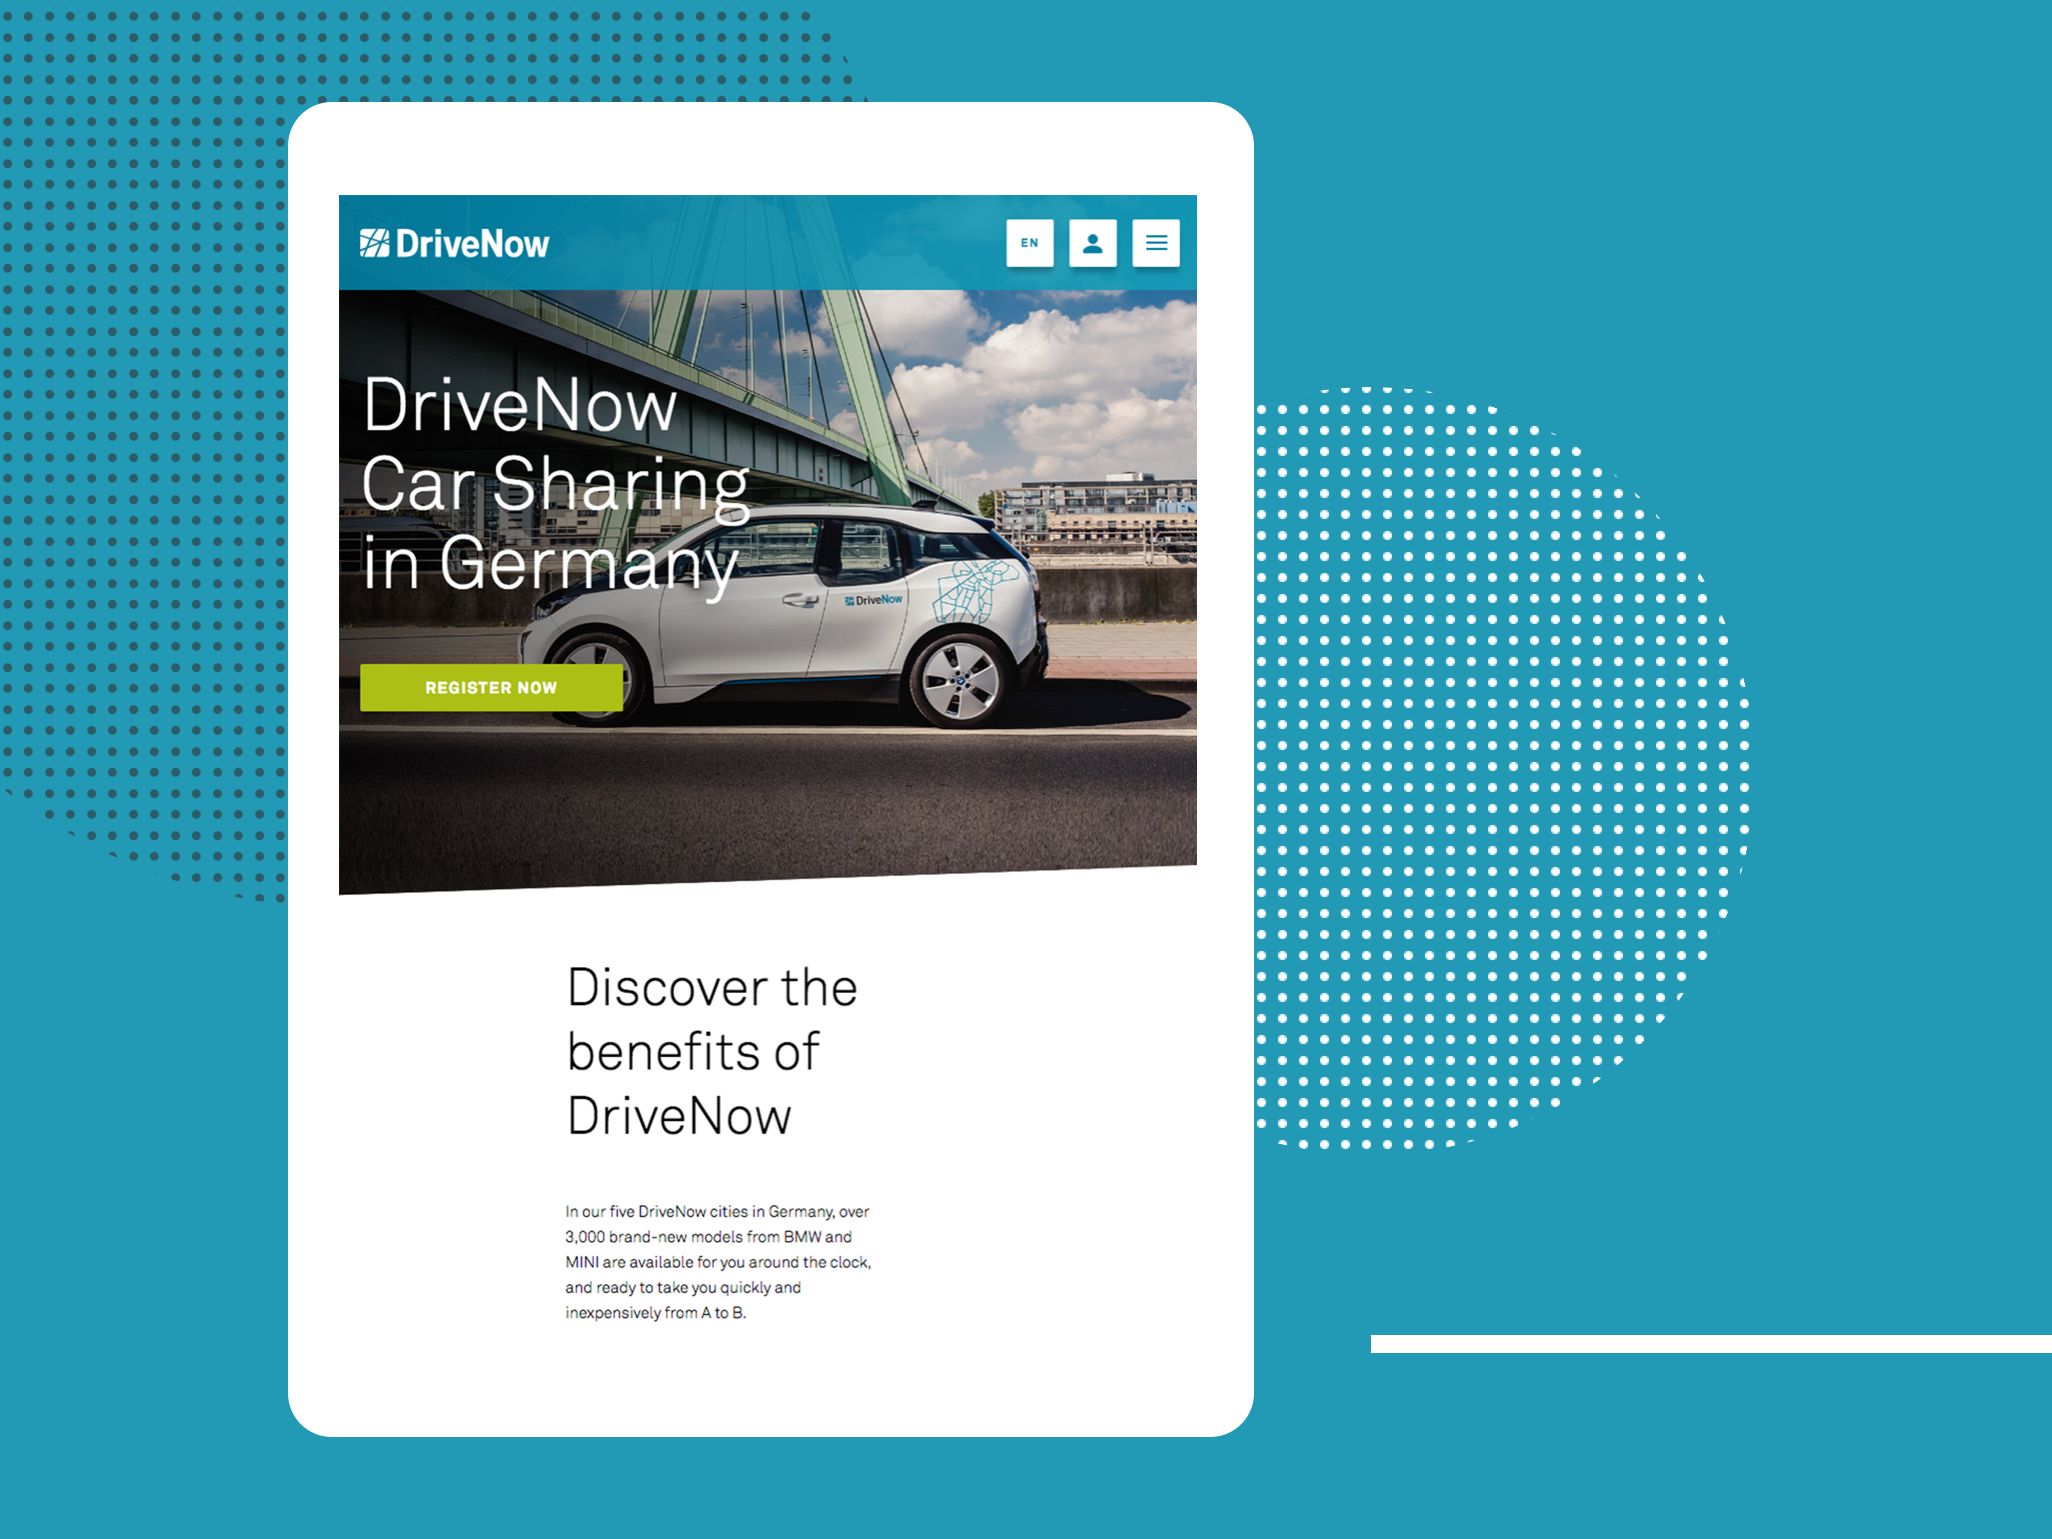 DriveNow - Discover the Benefits of DriveNow